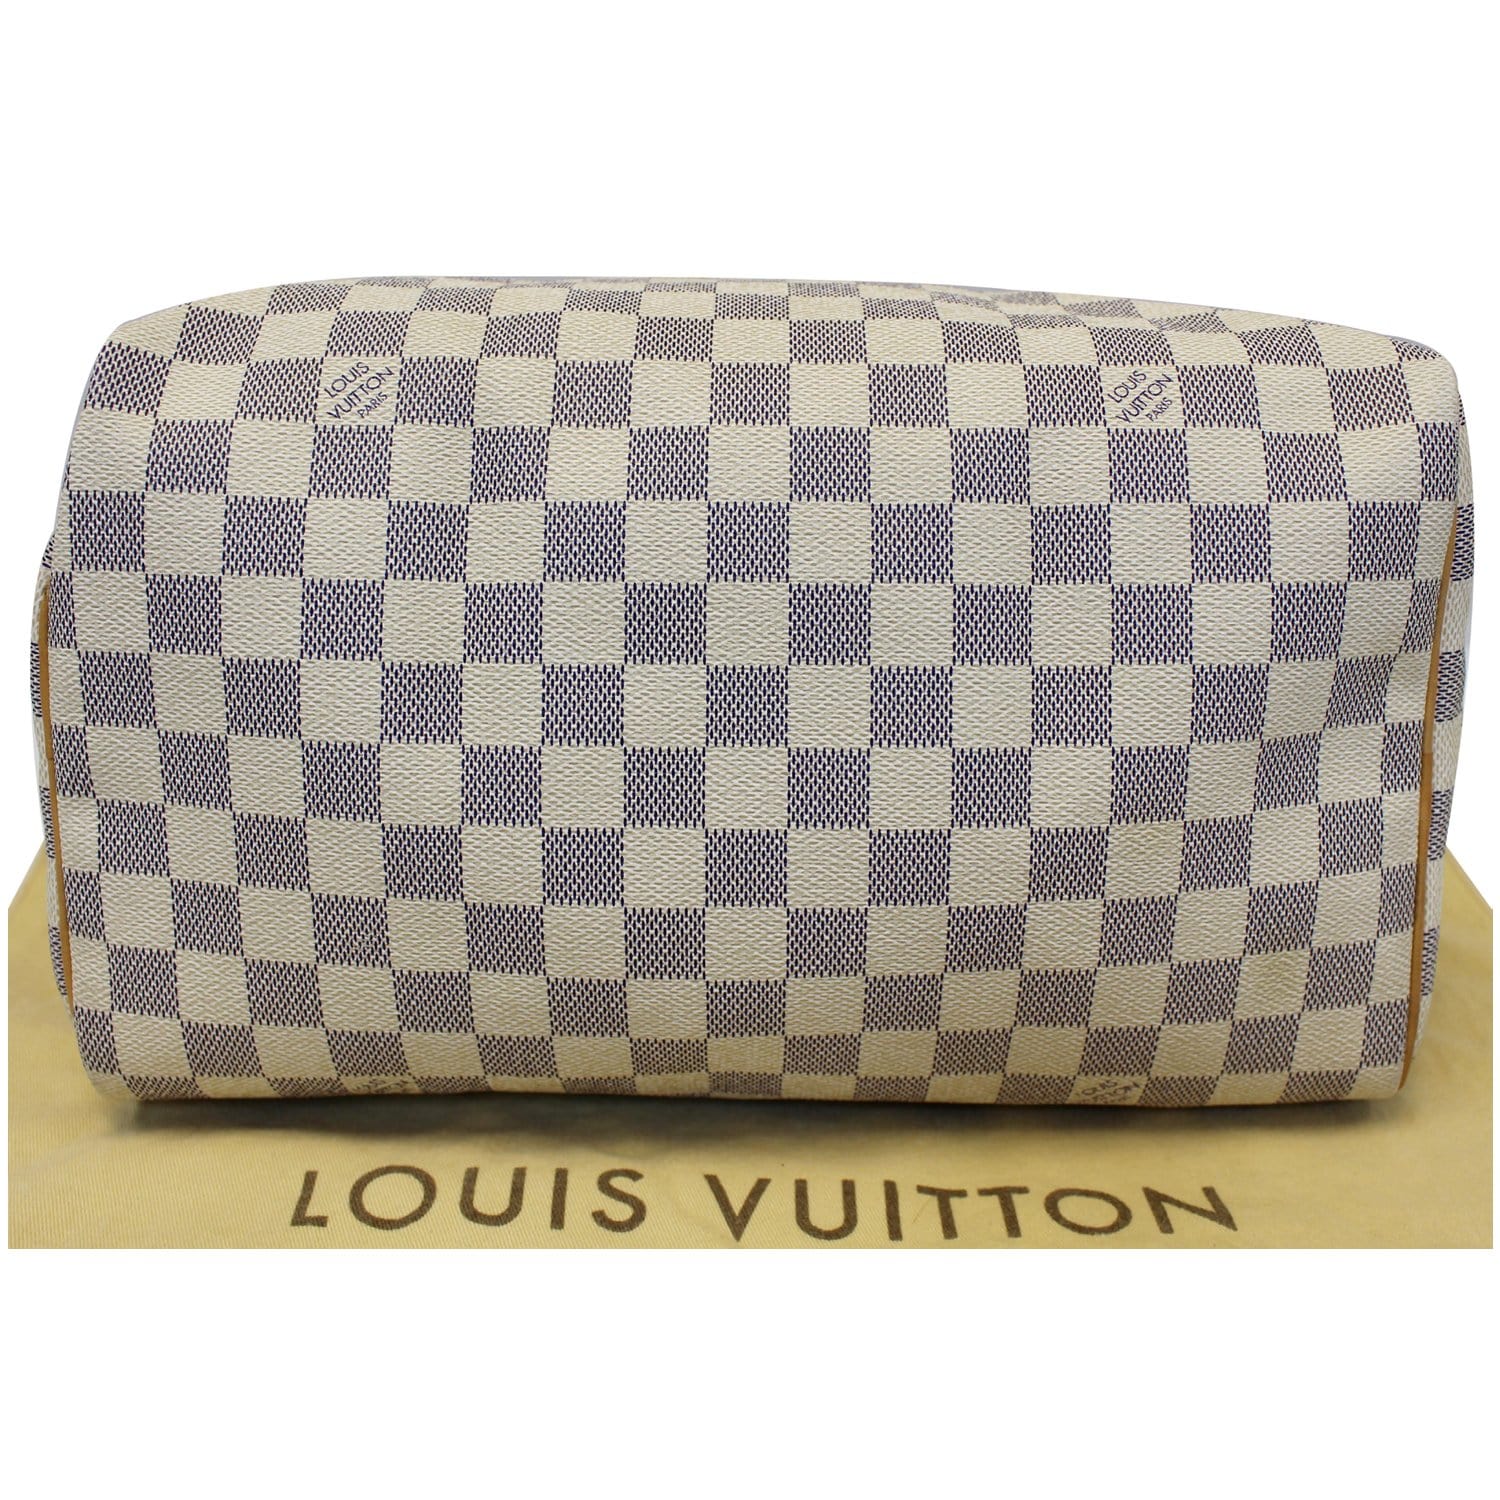 Louis Vuitton AUTHENTIC SPEEDY 30 By The Pool Limited Edition Damier Azur  Bag